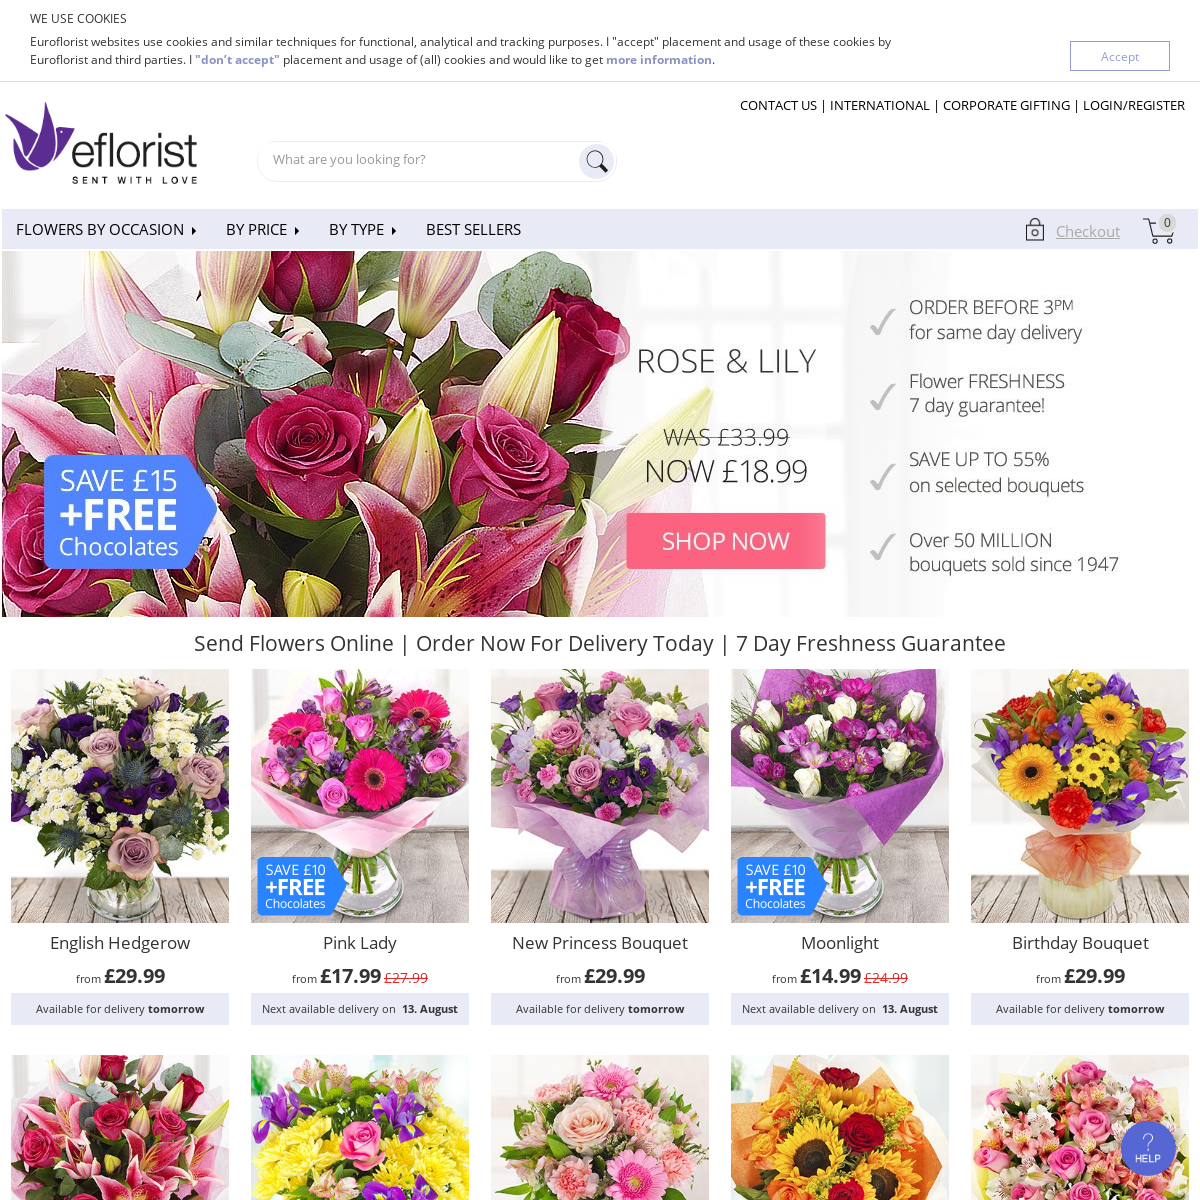 Same Day Flower Delivery - Send Flowers Online Today!